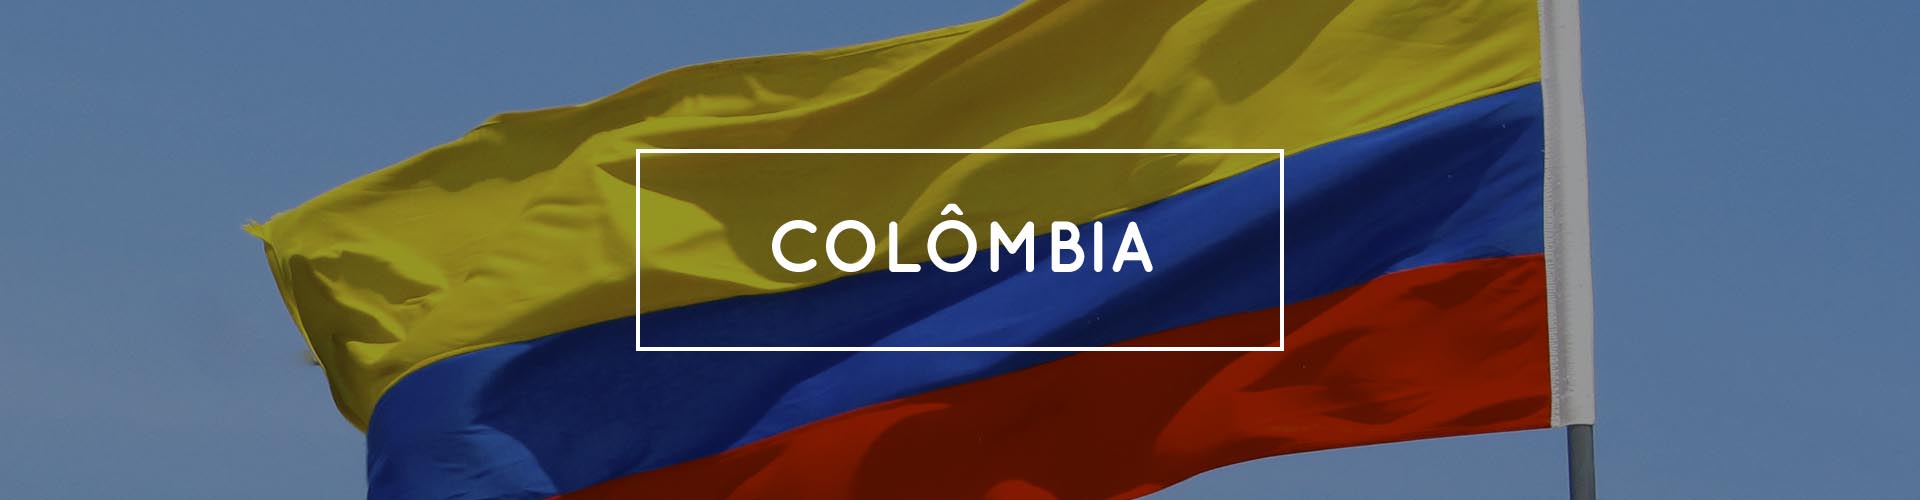 1920x500 Banner Colombia